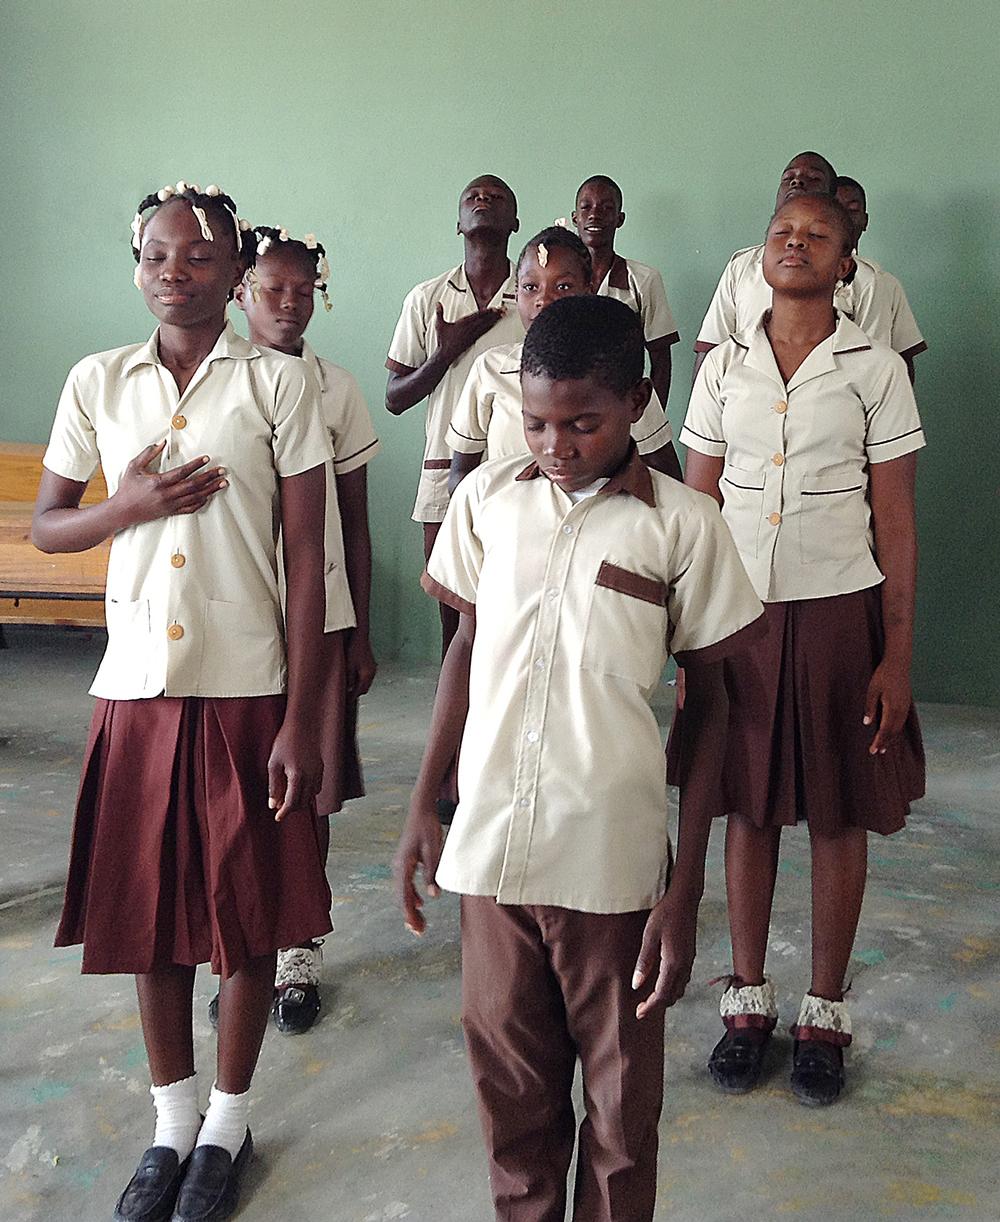 The foundation has an outreach programme in Port-au-Prince in Haiti